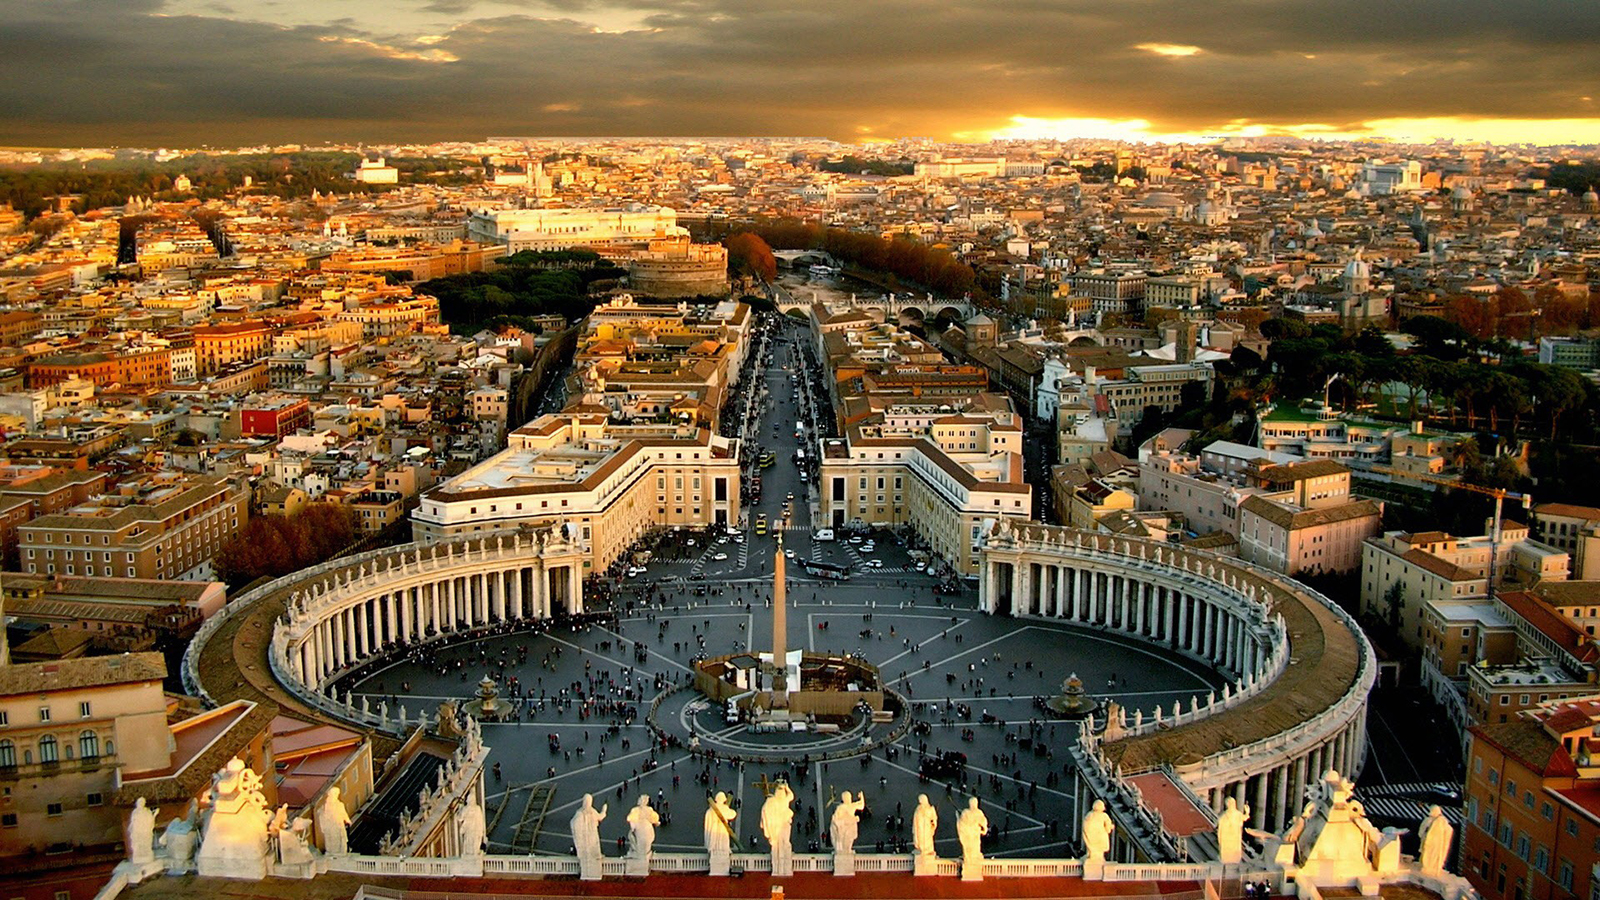 WORLD'S LEAST POPULATED CITY- With a paltry population of 842, the city-state of Vatican City is the smallest city and state in the world.